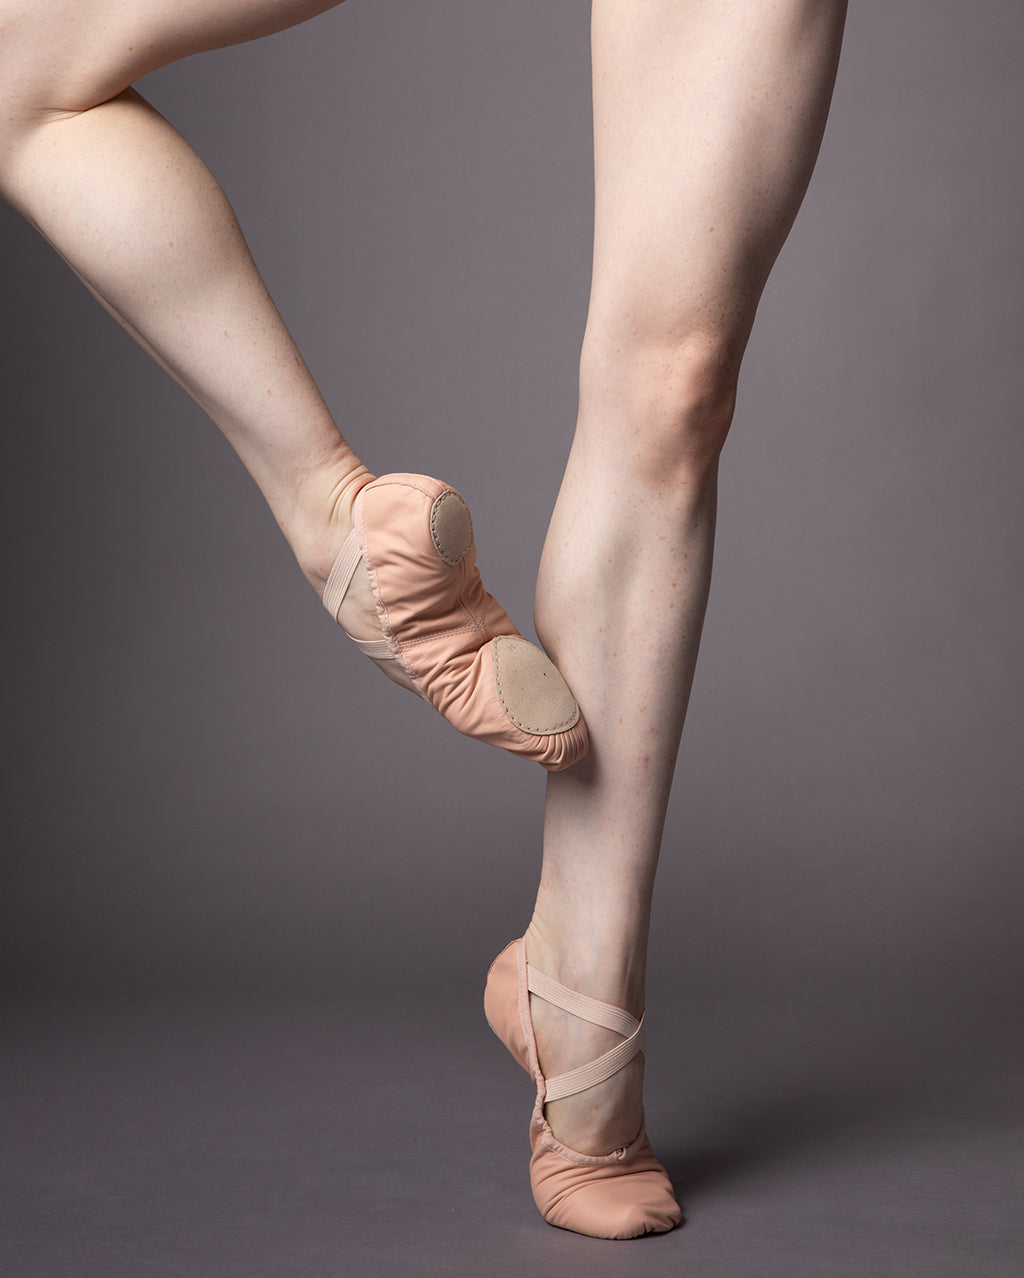 The legs of a ballet dancer wearing the Precision ballet shoes 